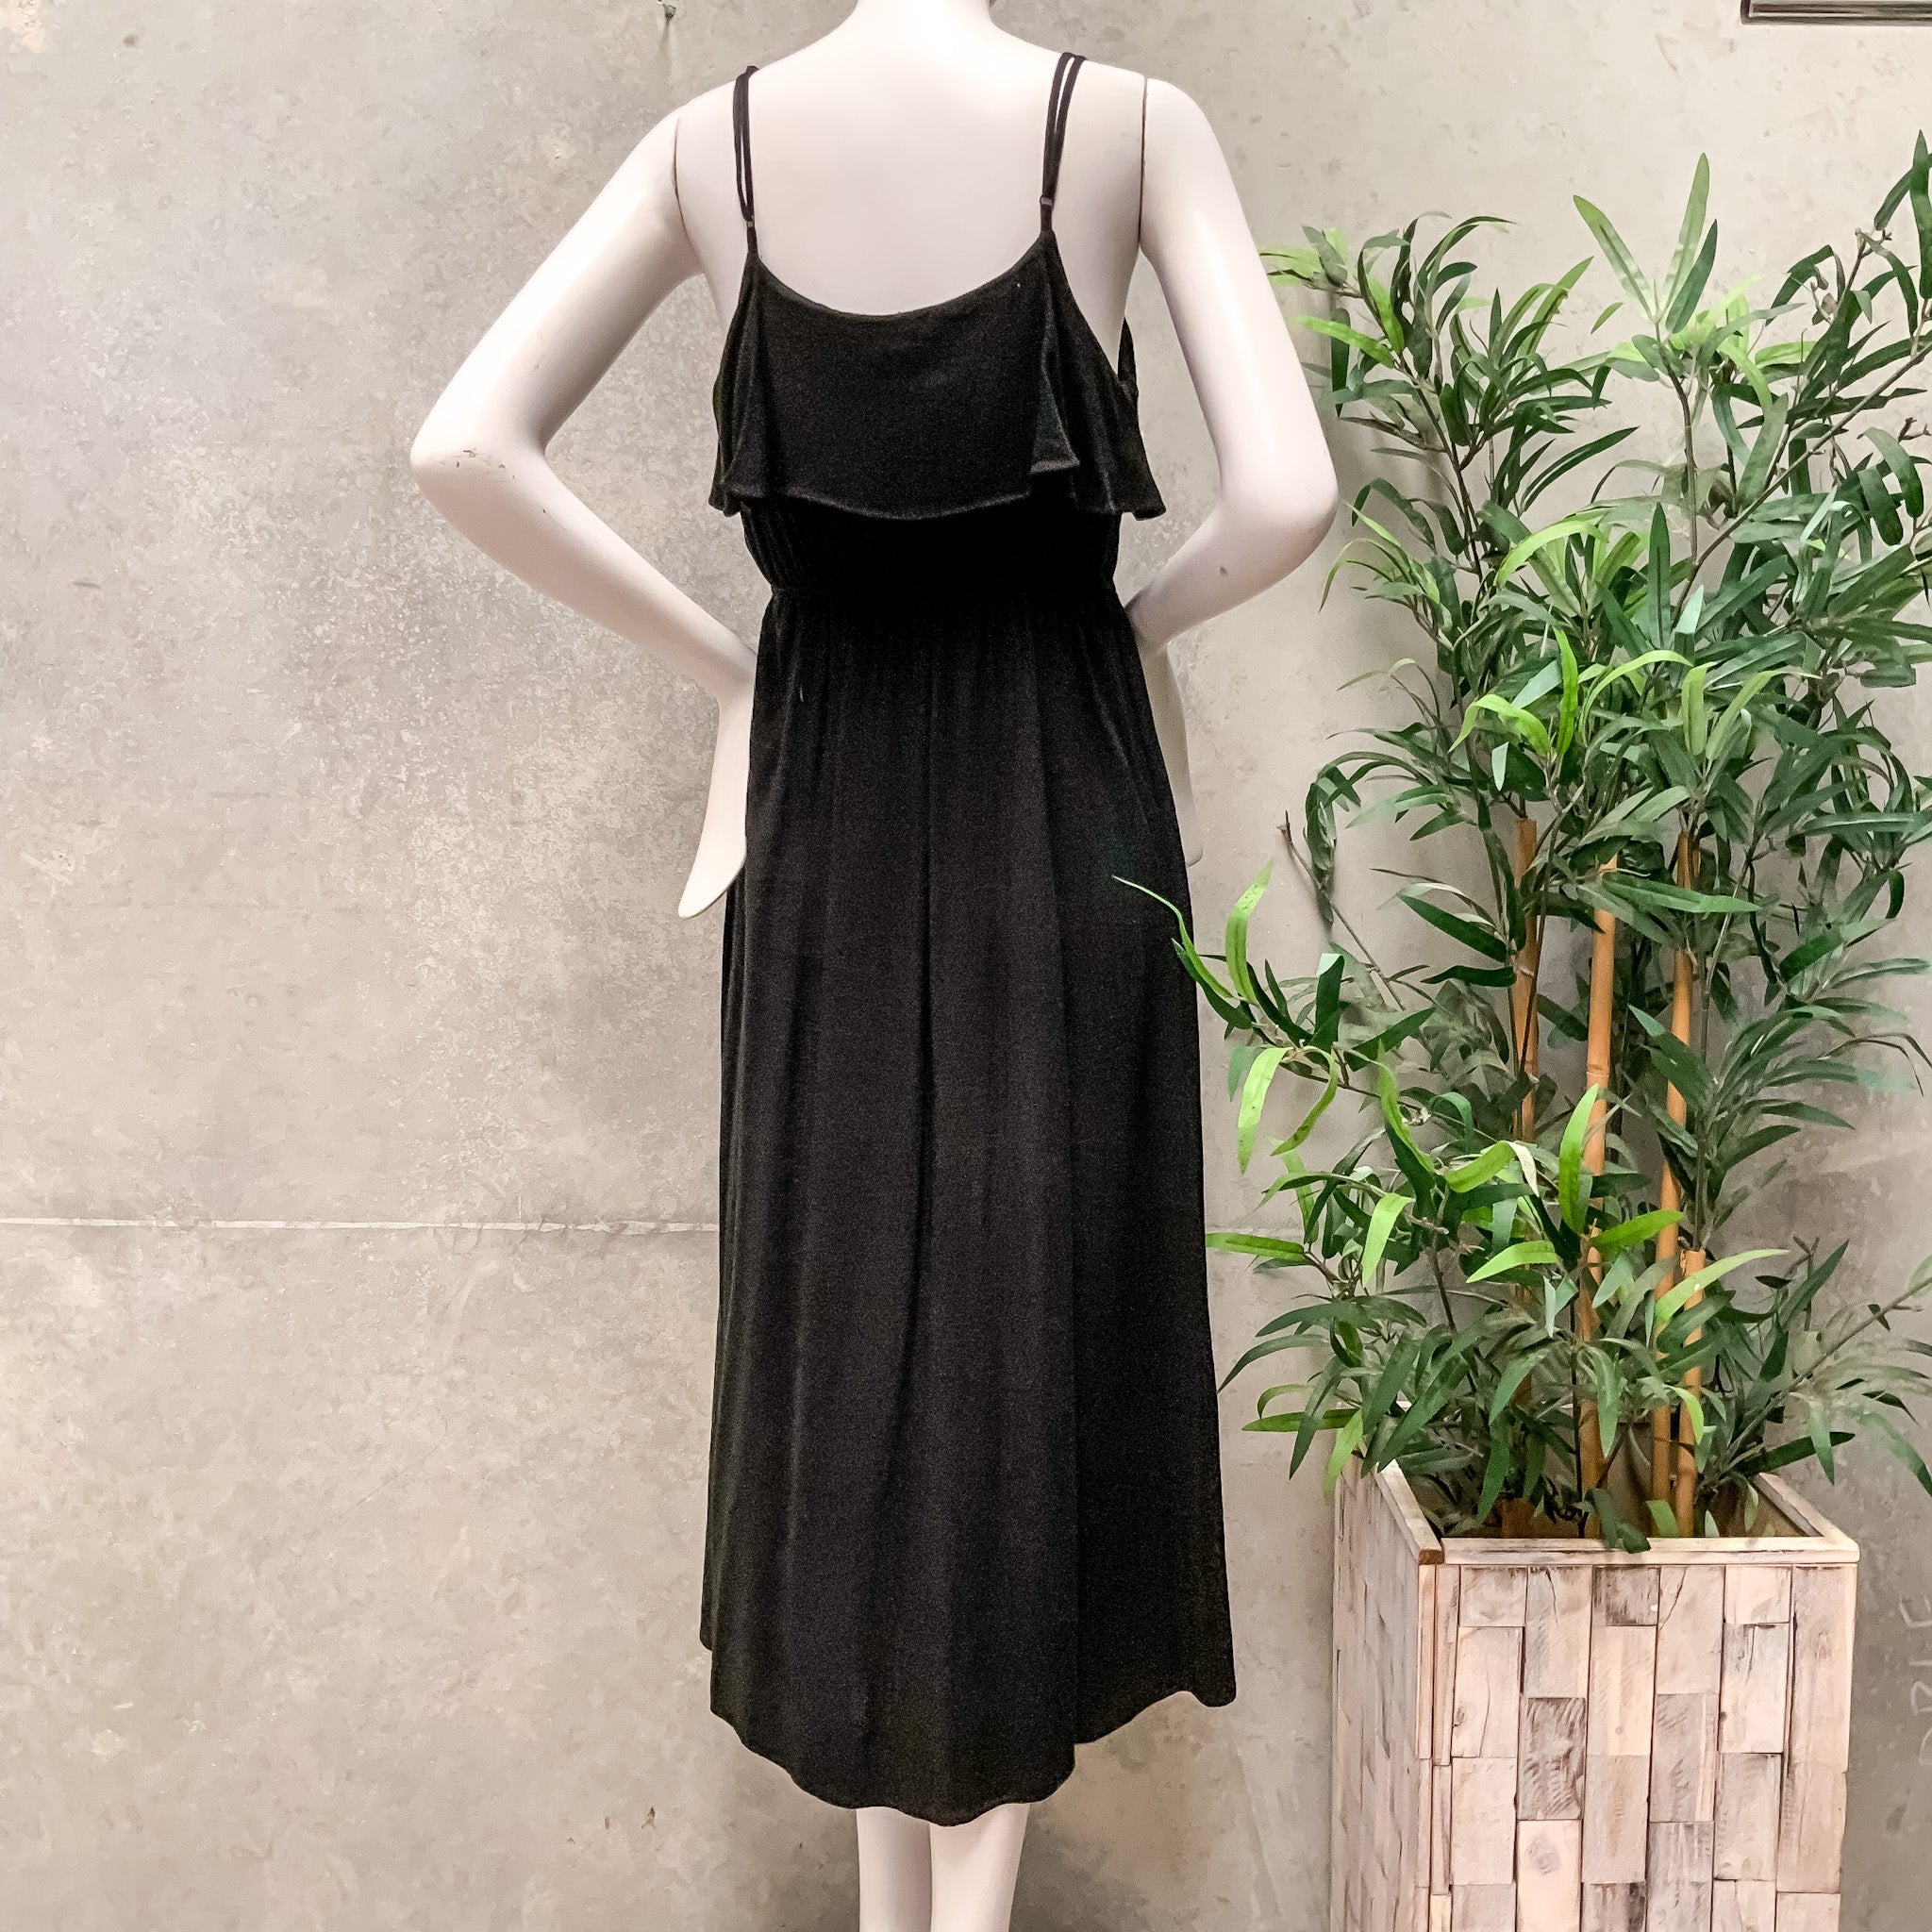 YOURS TRULY Black Frill Bust Elastic Waist Maxi Dress - Size 8